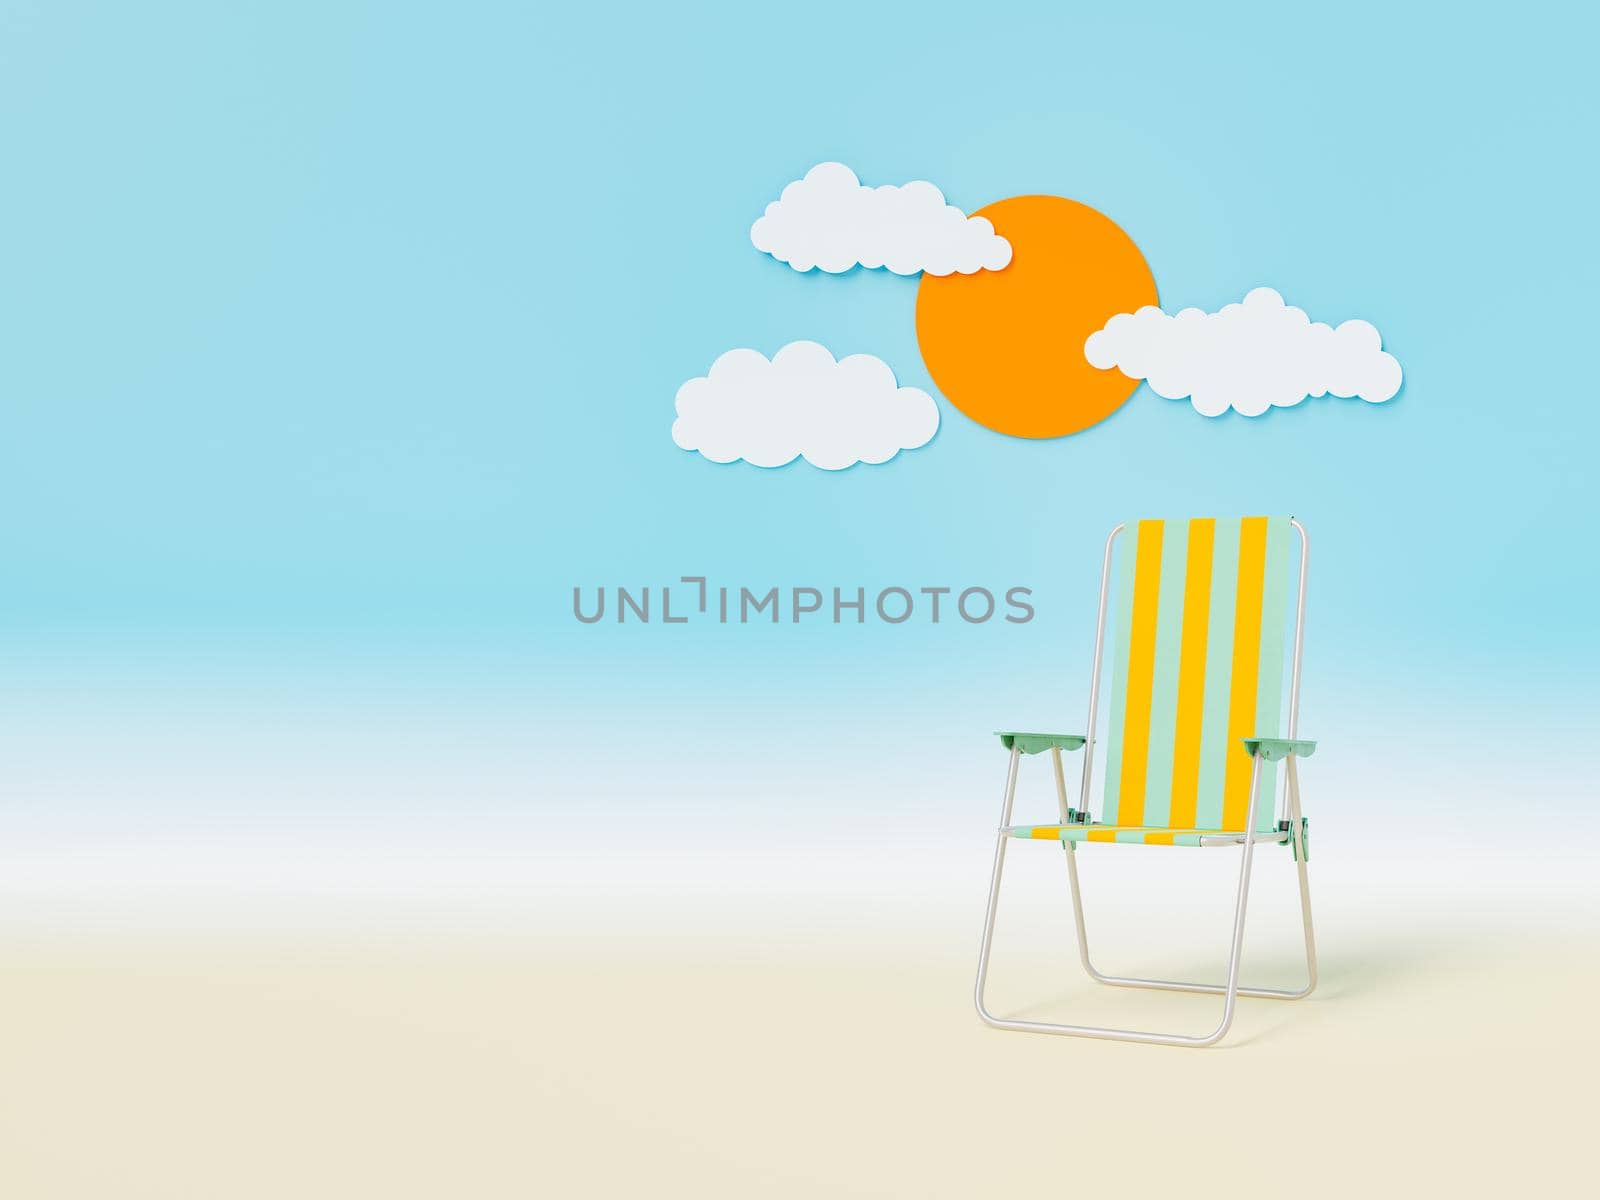 3D rendering of striped deckchair located on sandy beach against blue sky with sun and clouds during summer vacation